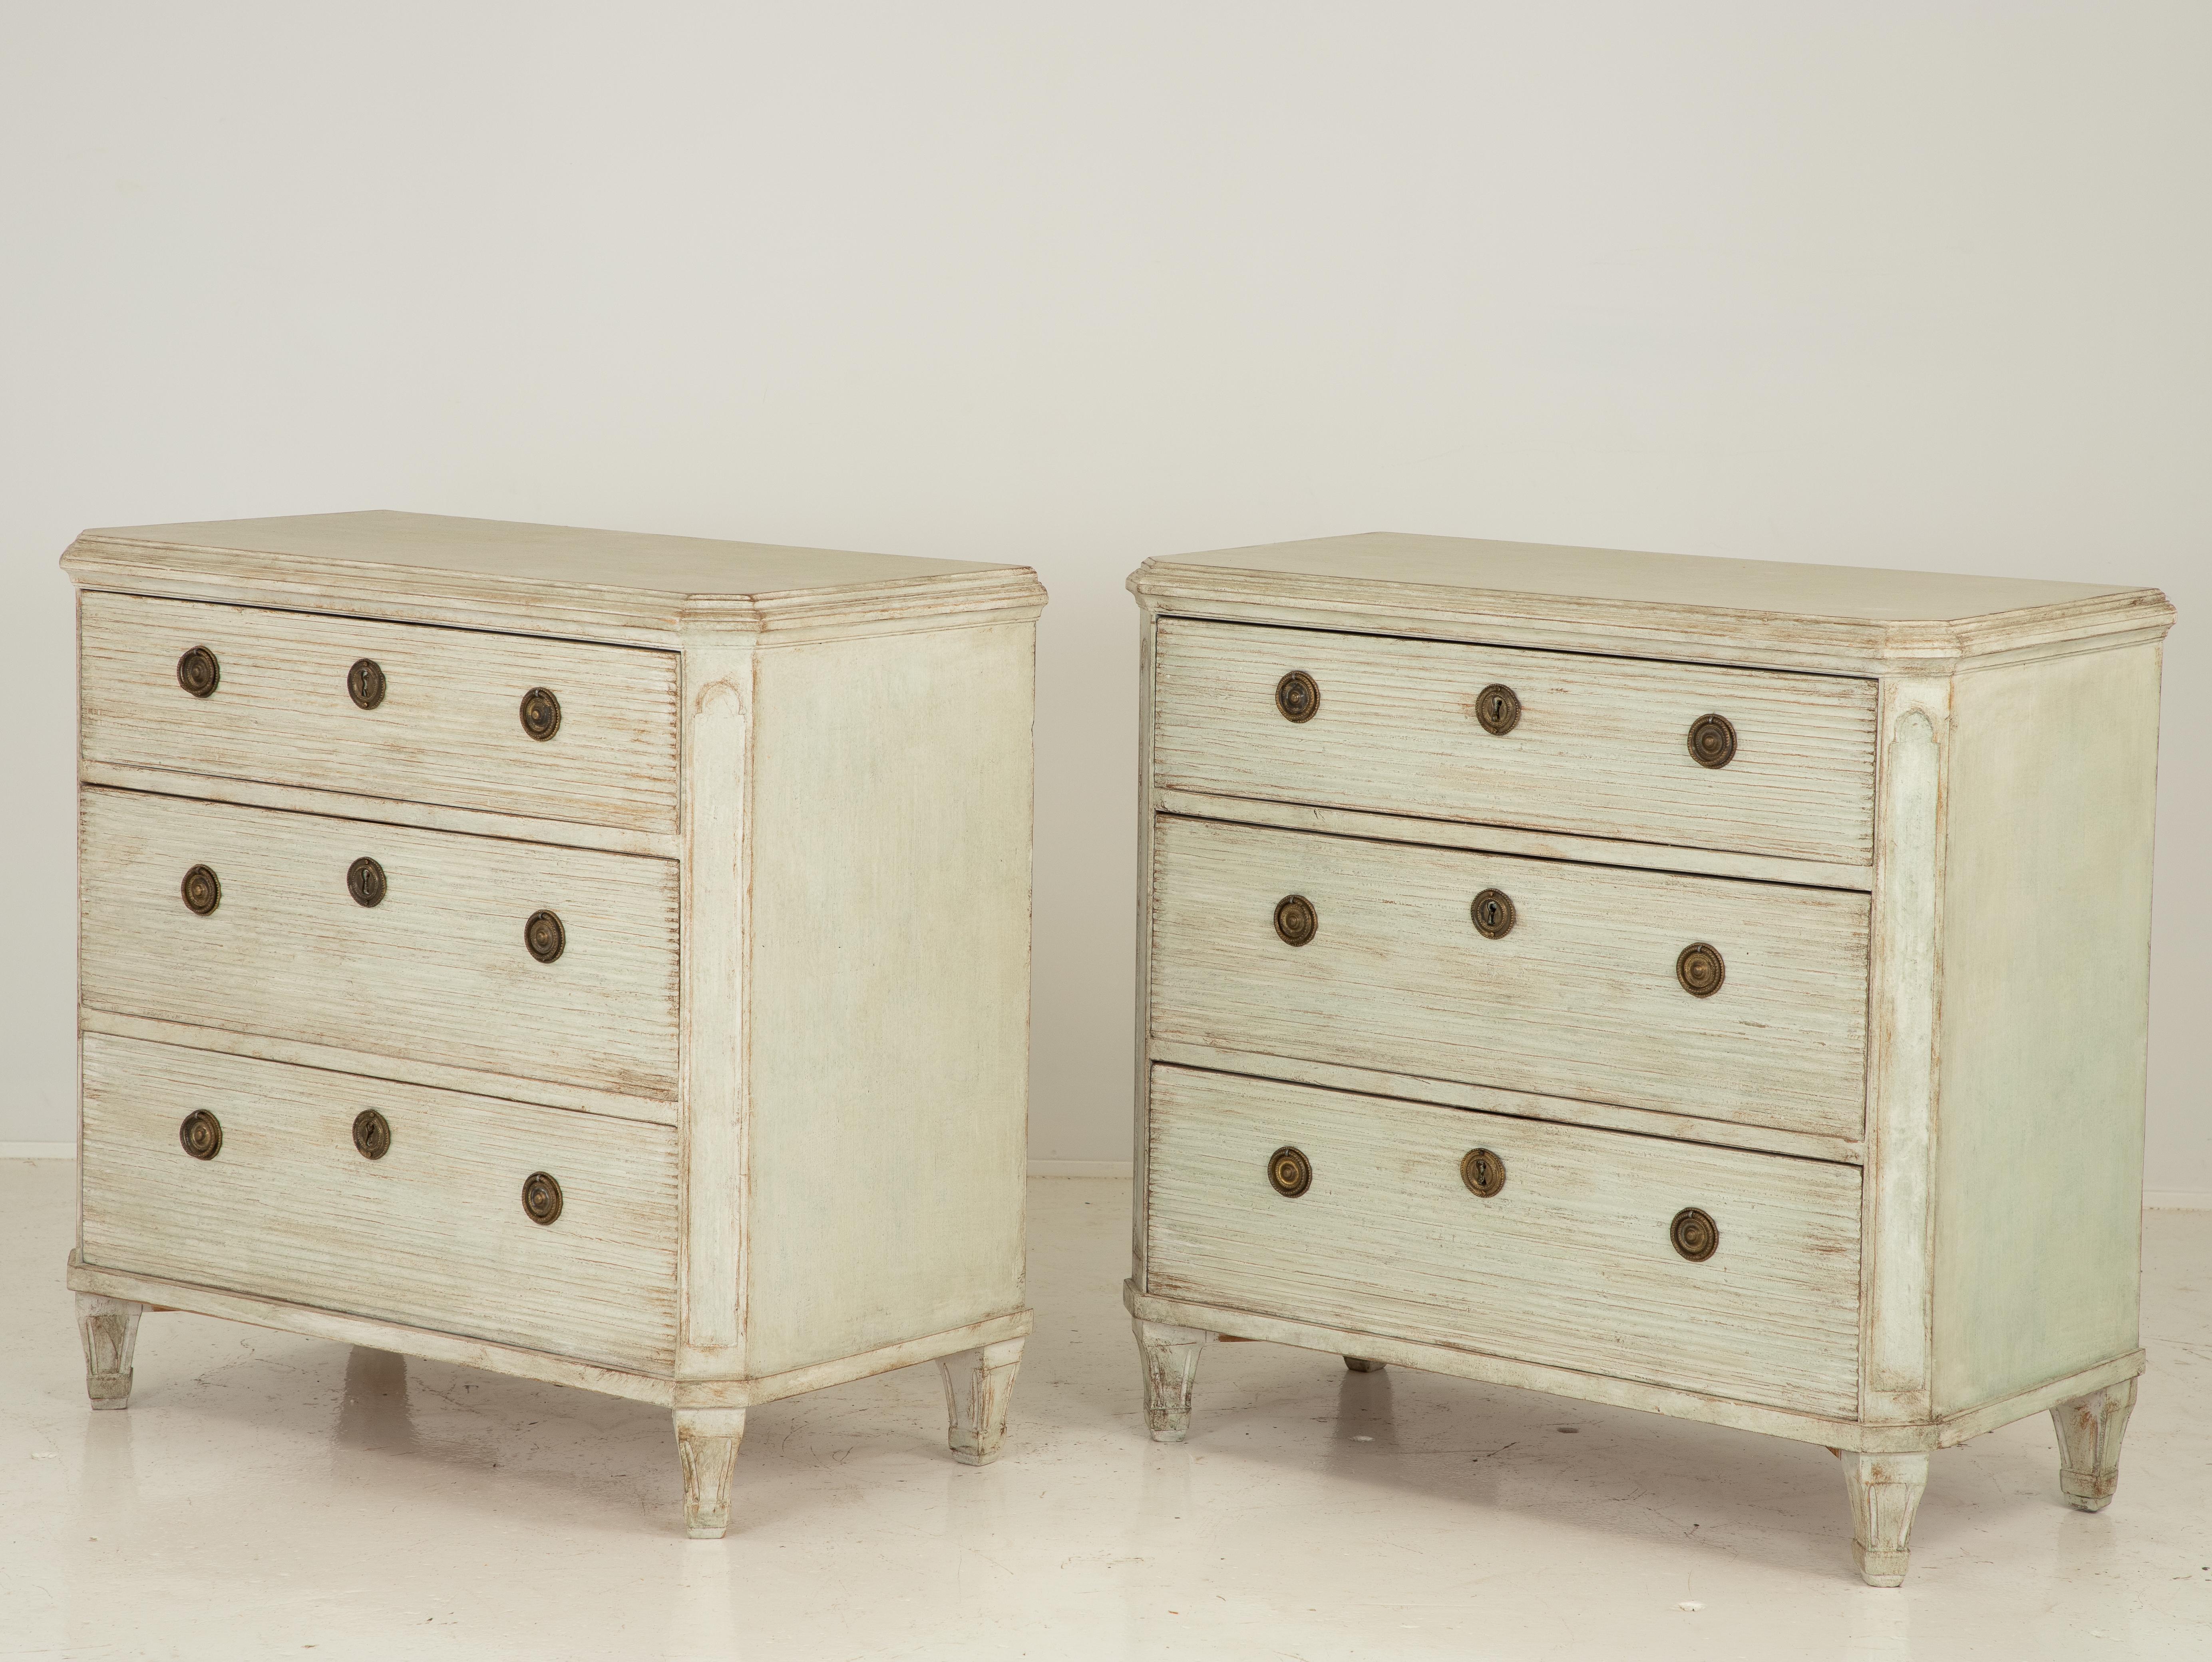 A late 19th century pair of painted Swedish Gustavian style commodes. Each commode has three drawers with brass ring pulls with beautifully carved reeded drawer fronts and two working keys. Canted corner on tapered feet. Dovetail joinery and later